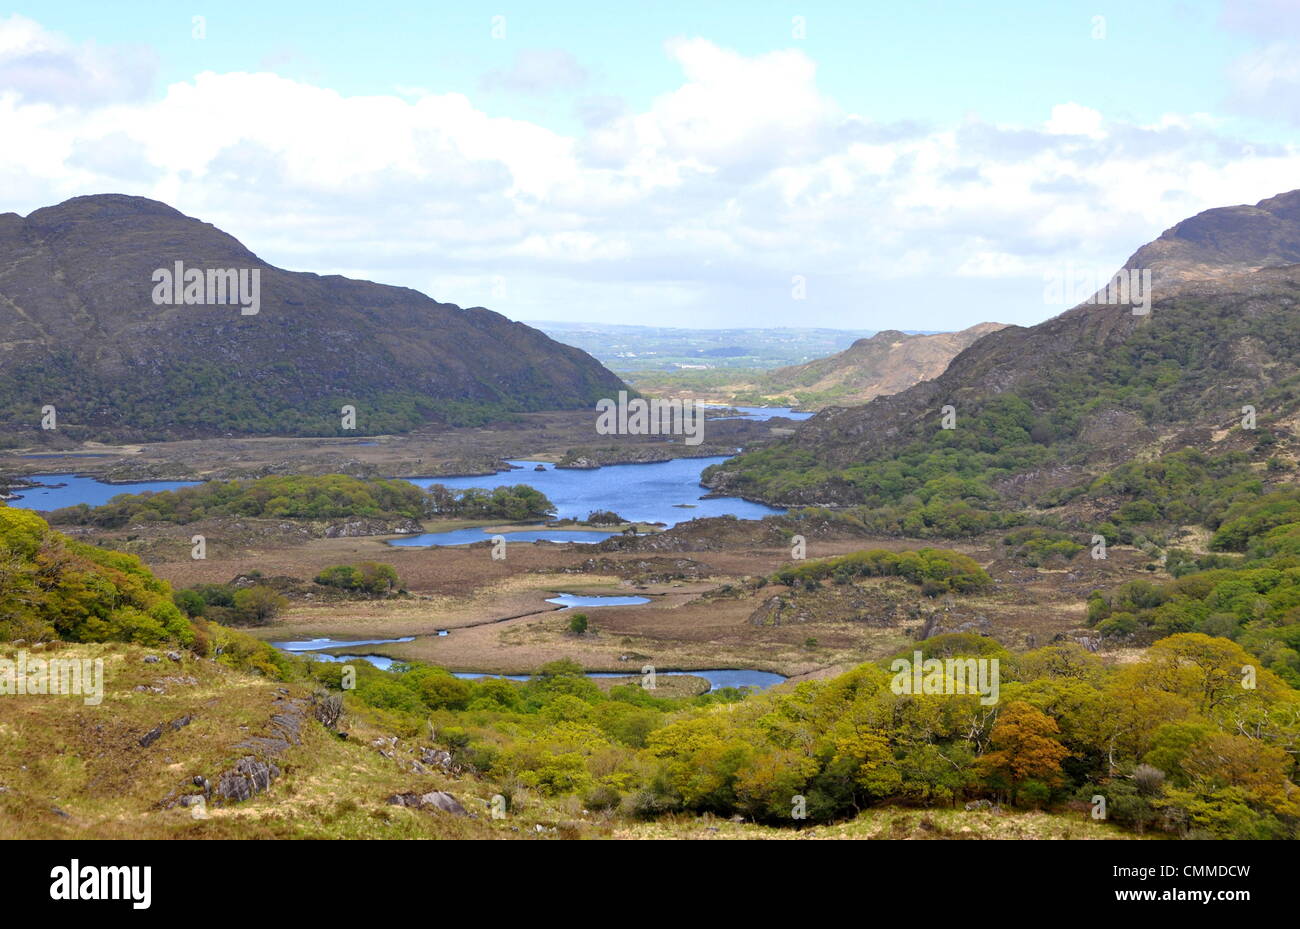 Ladies View is located between Kenmare and Killarney on the Ring of Kerry and in the heart of Killarney National Park, photo taken on May 27, 2013. The panorama of the three Lakes of Killarney and the mountains on either side was much admired by Queen Victoria’s ladies-in-waiting, when they stayed here during the royal visit in 1861, hence the name Ladies View. In 1981, the National Park was designated as a Biosphere Reserve by the UNESCO. Photo: Frank Baumgart Stock Photo